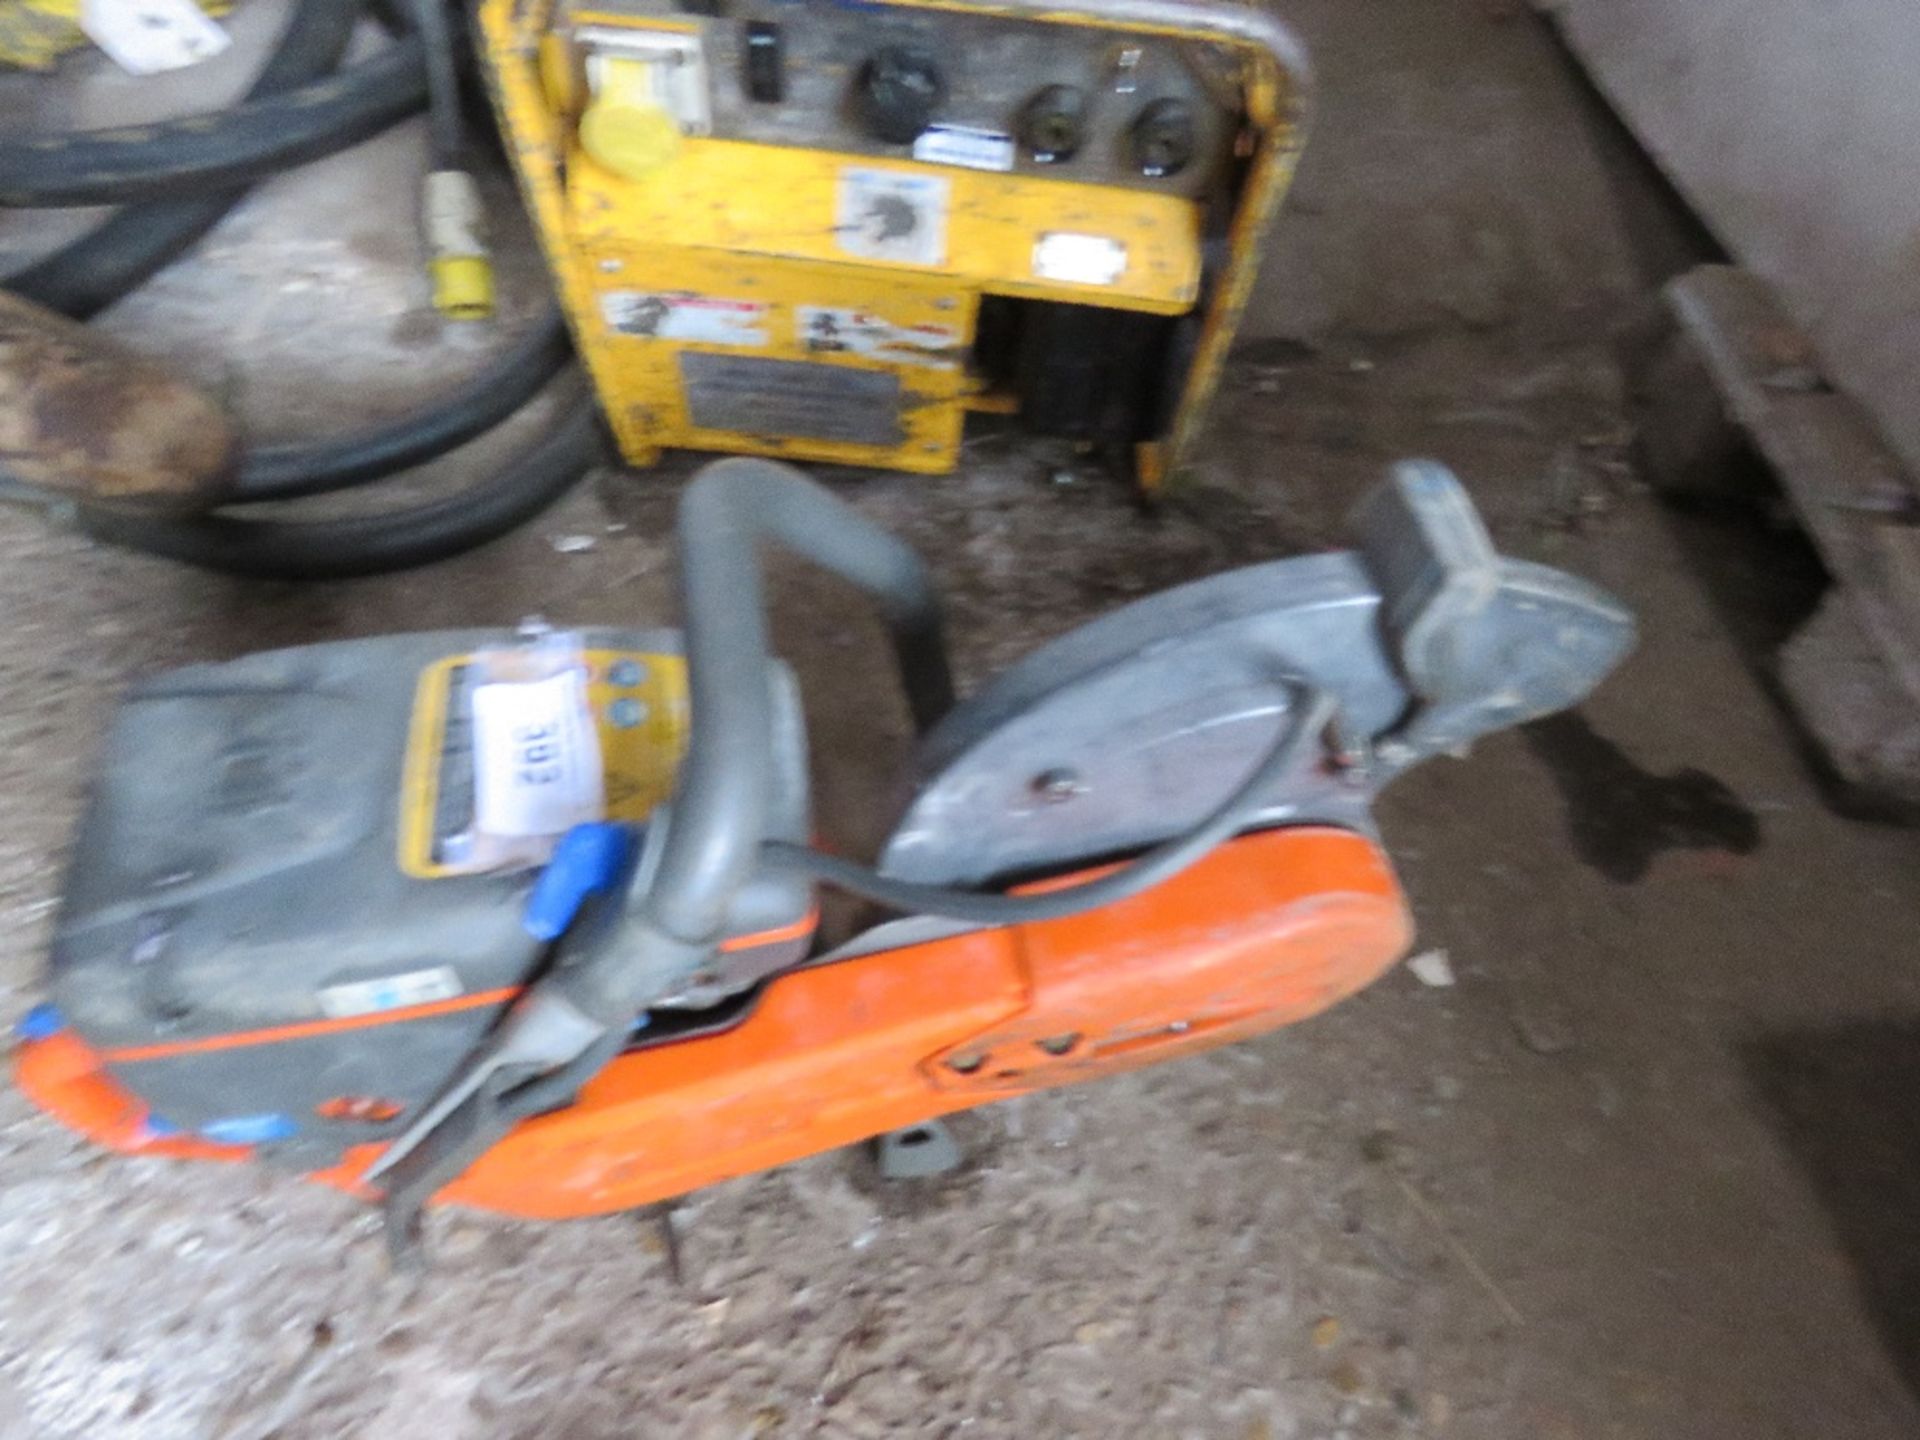 HUSQVARNA PETROL SAW CONDITION UNKNOWN, UNTESTED - Image 2 of 3